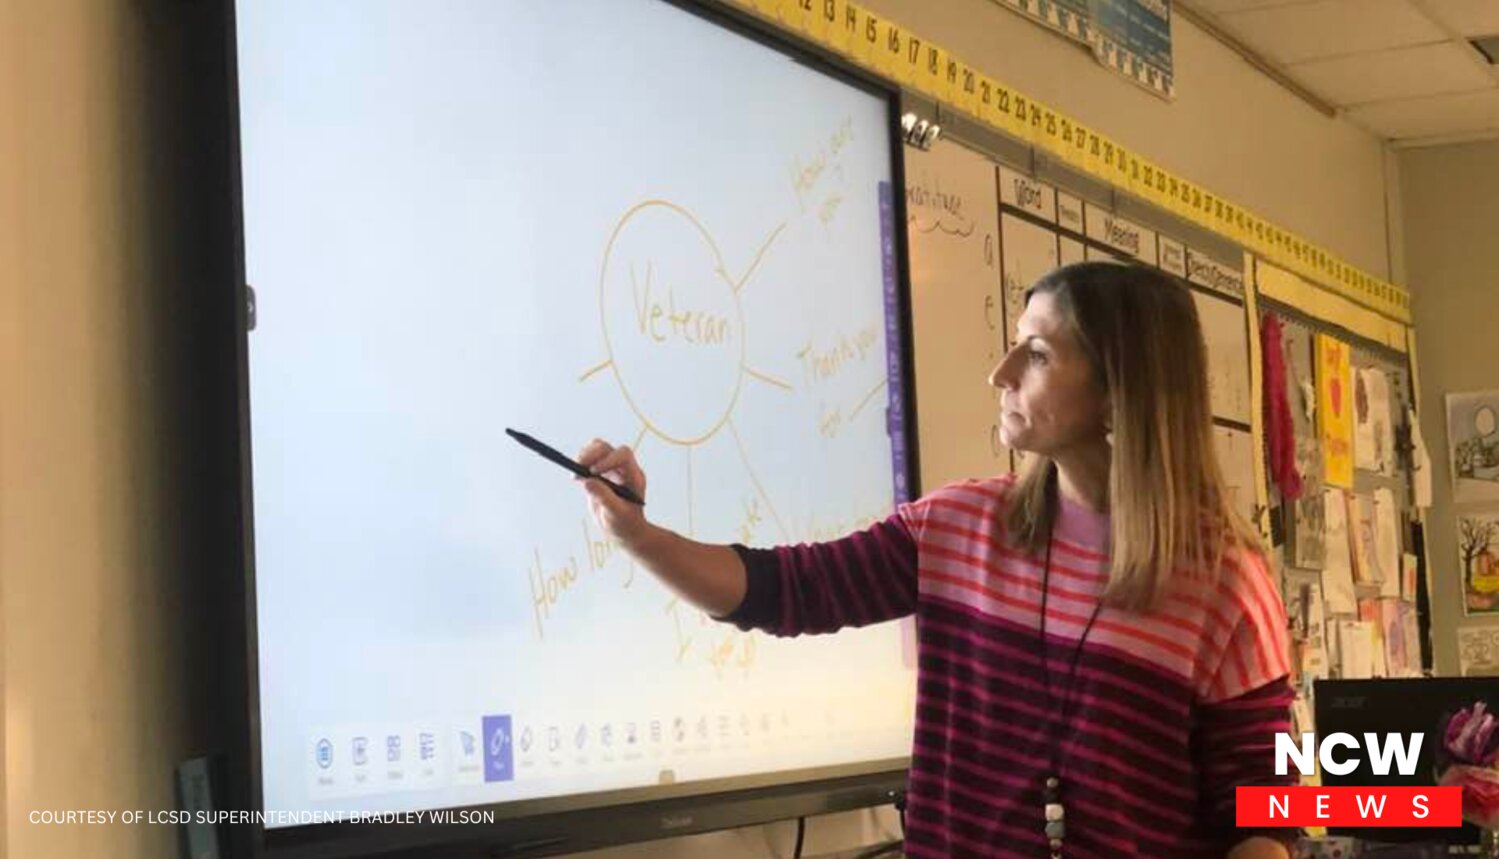 Morgan Owings Elementary 4th grade teacher Kristin Nelson records student “word web” input utilizing new Onescreen Touchscreen addition.